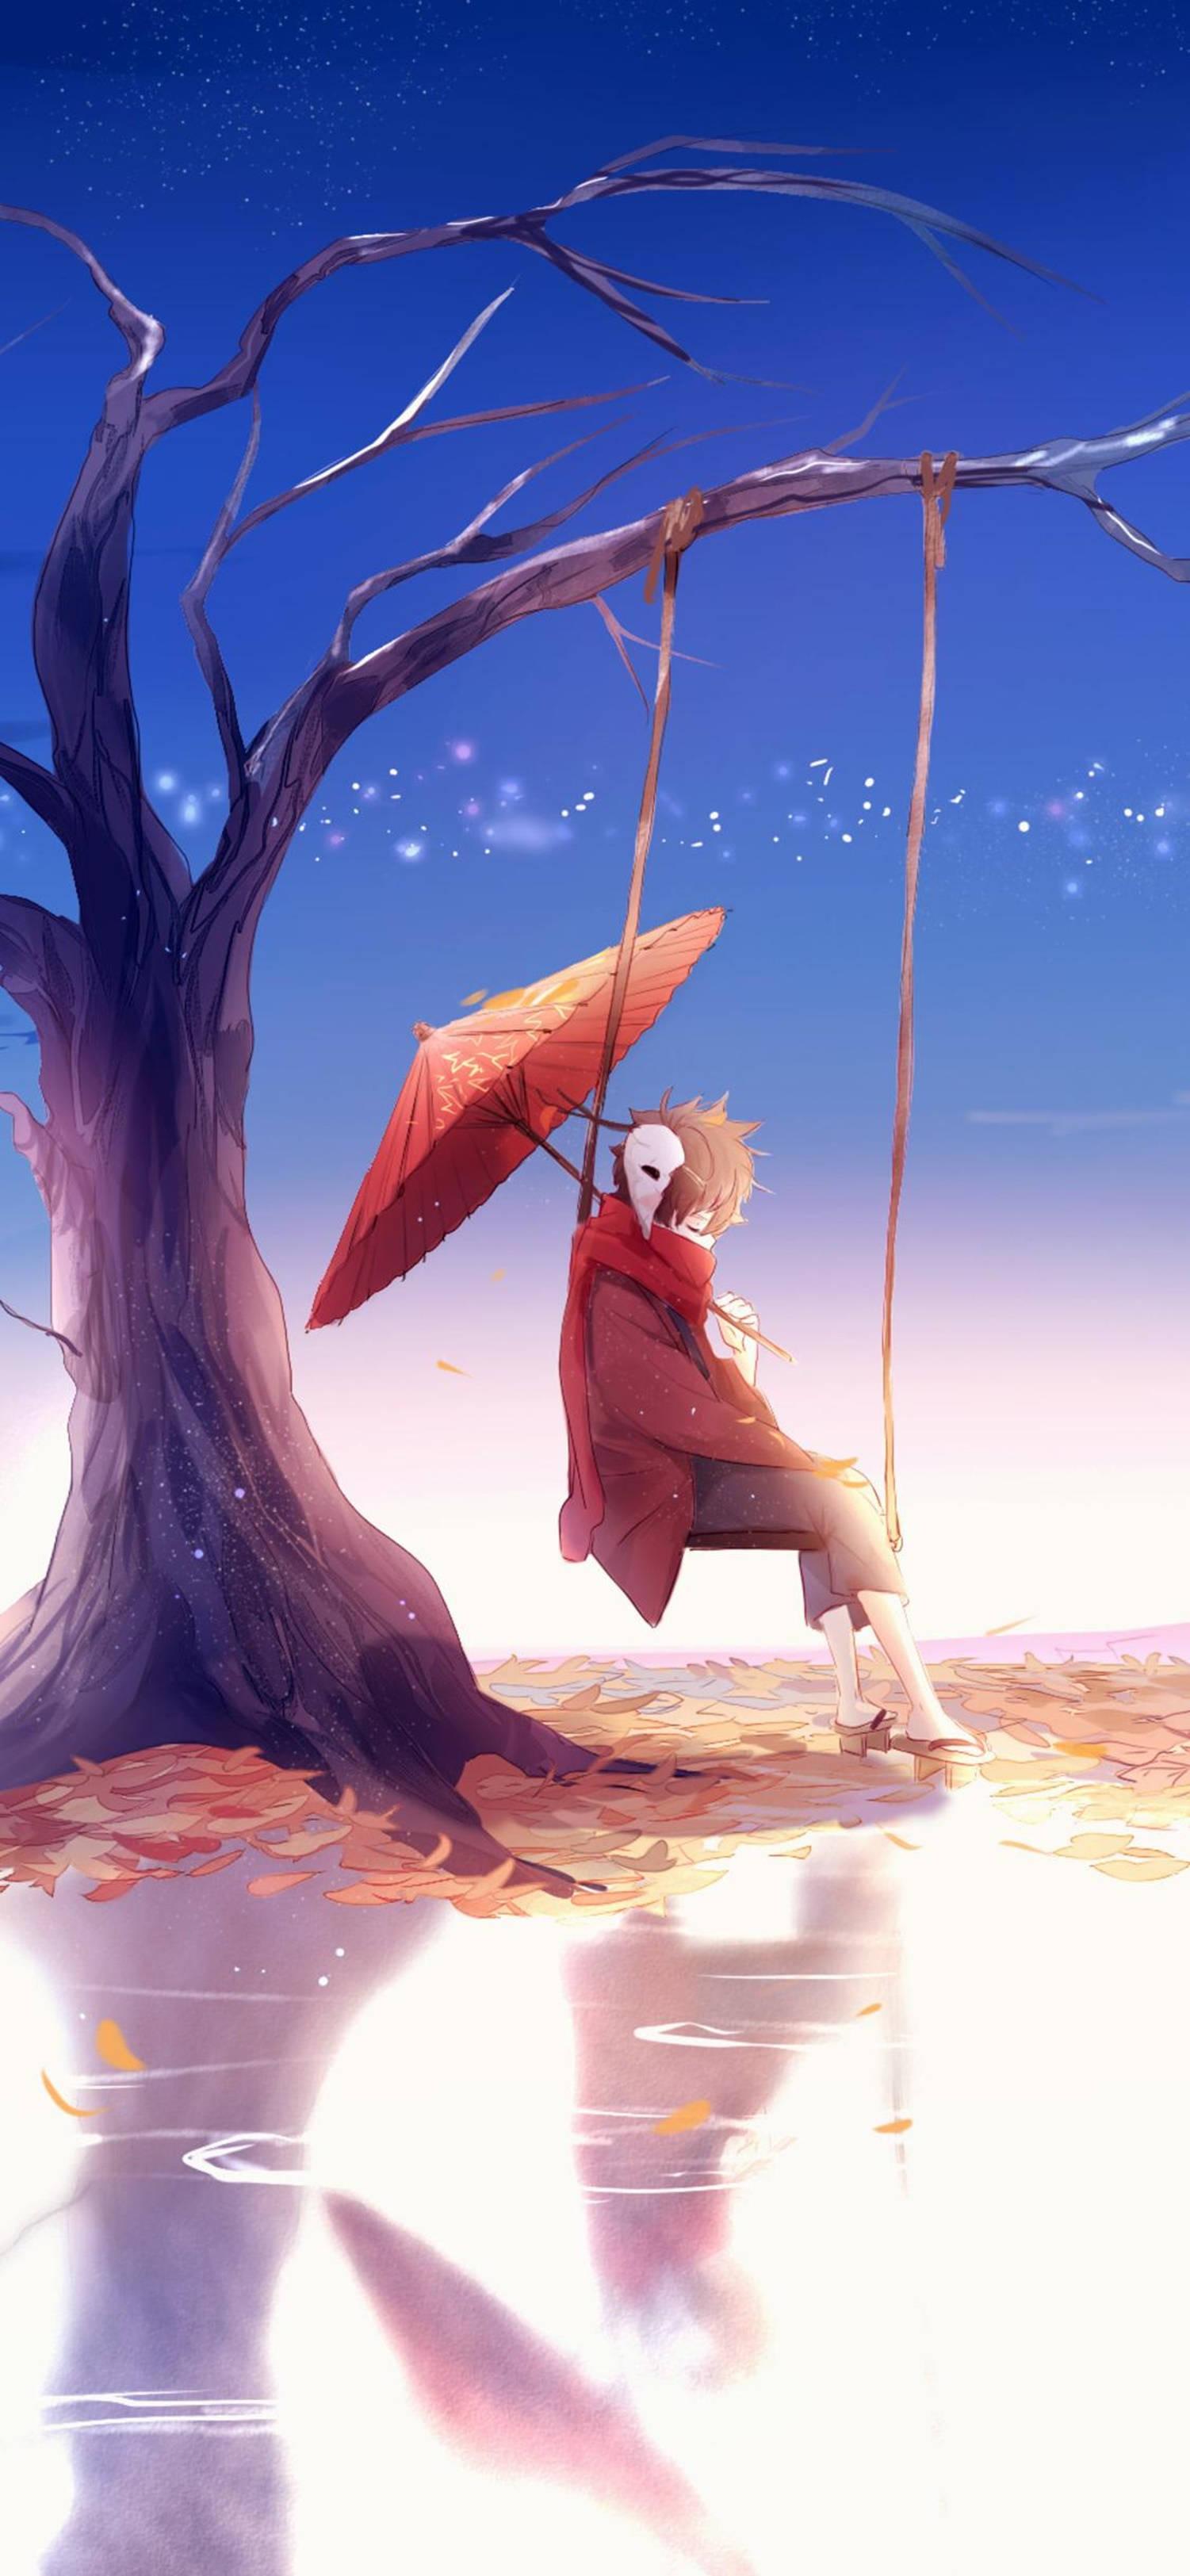 Download 4K Anime IPhone Swing Boy With Umbrella Wallpaper